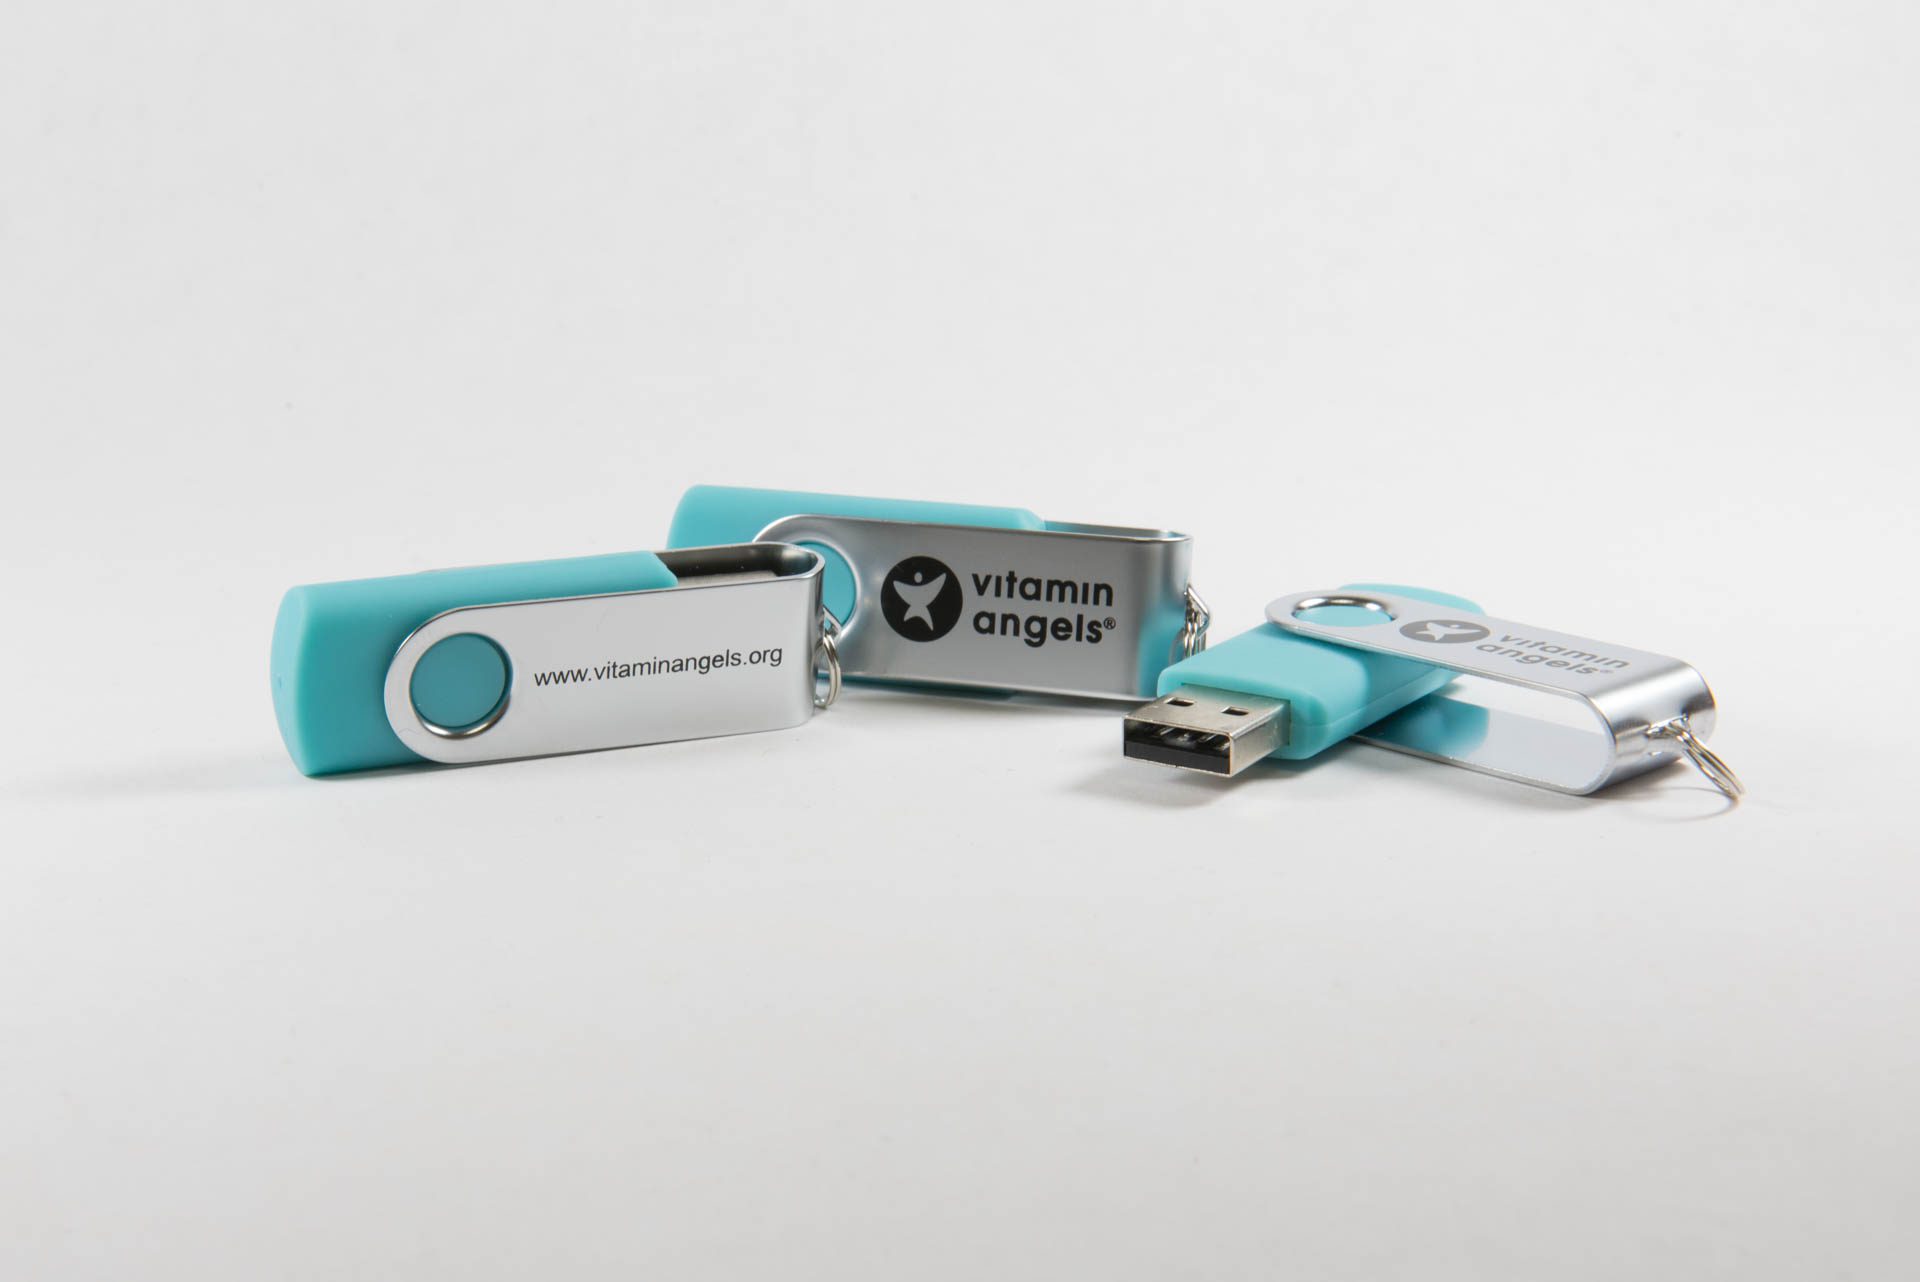 How a simple USB drive can save lives